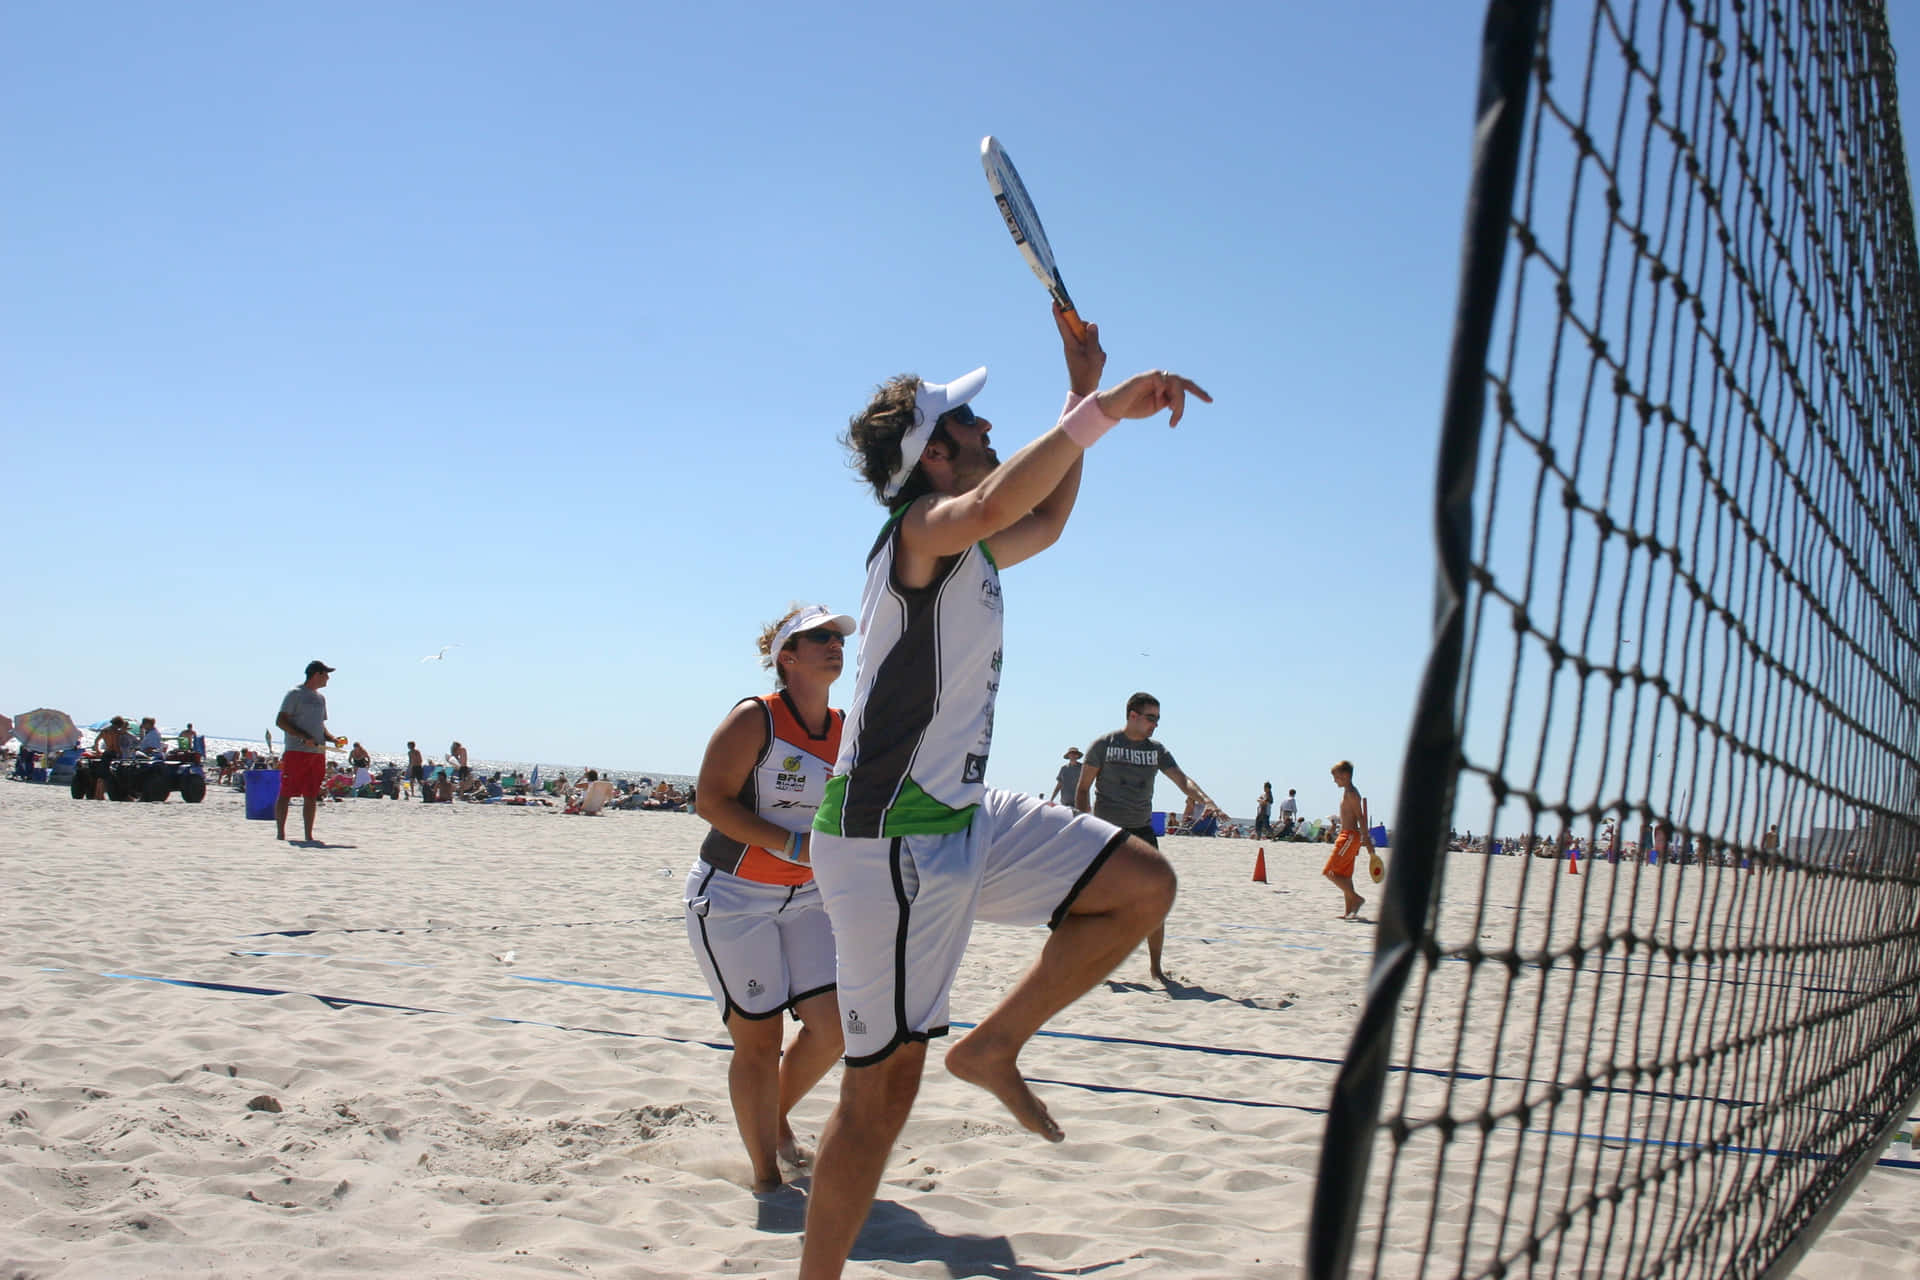 Exciting Beach Tennis Match in Action Wallpaper